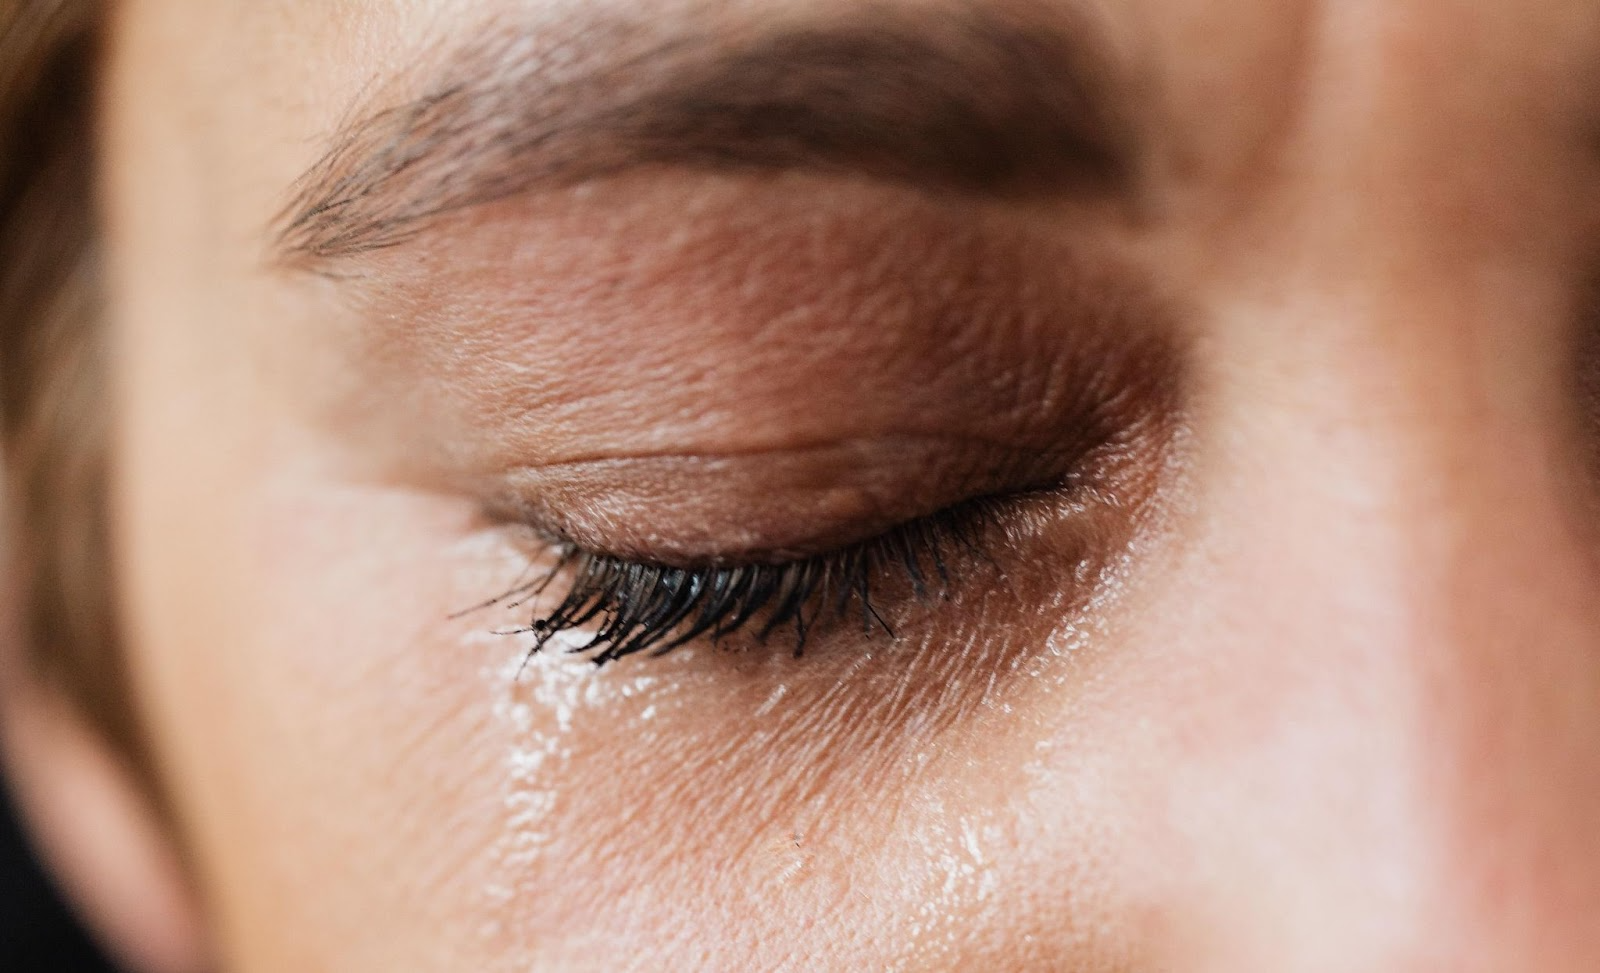 Source: https://www.pexels.com/photo/lonely-woman-crying-with-closed-eyes-4471316/